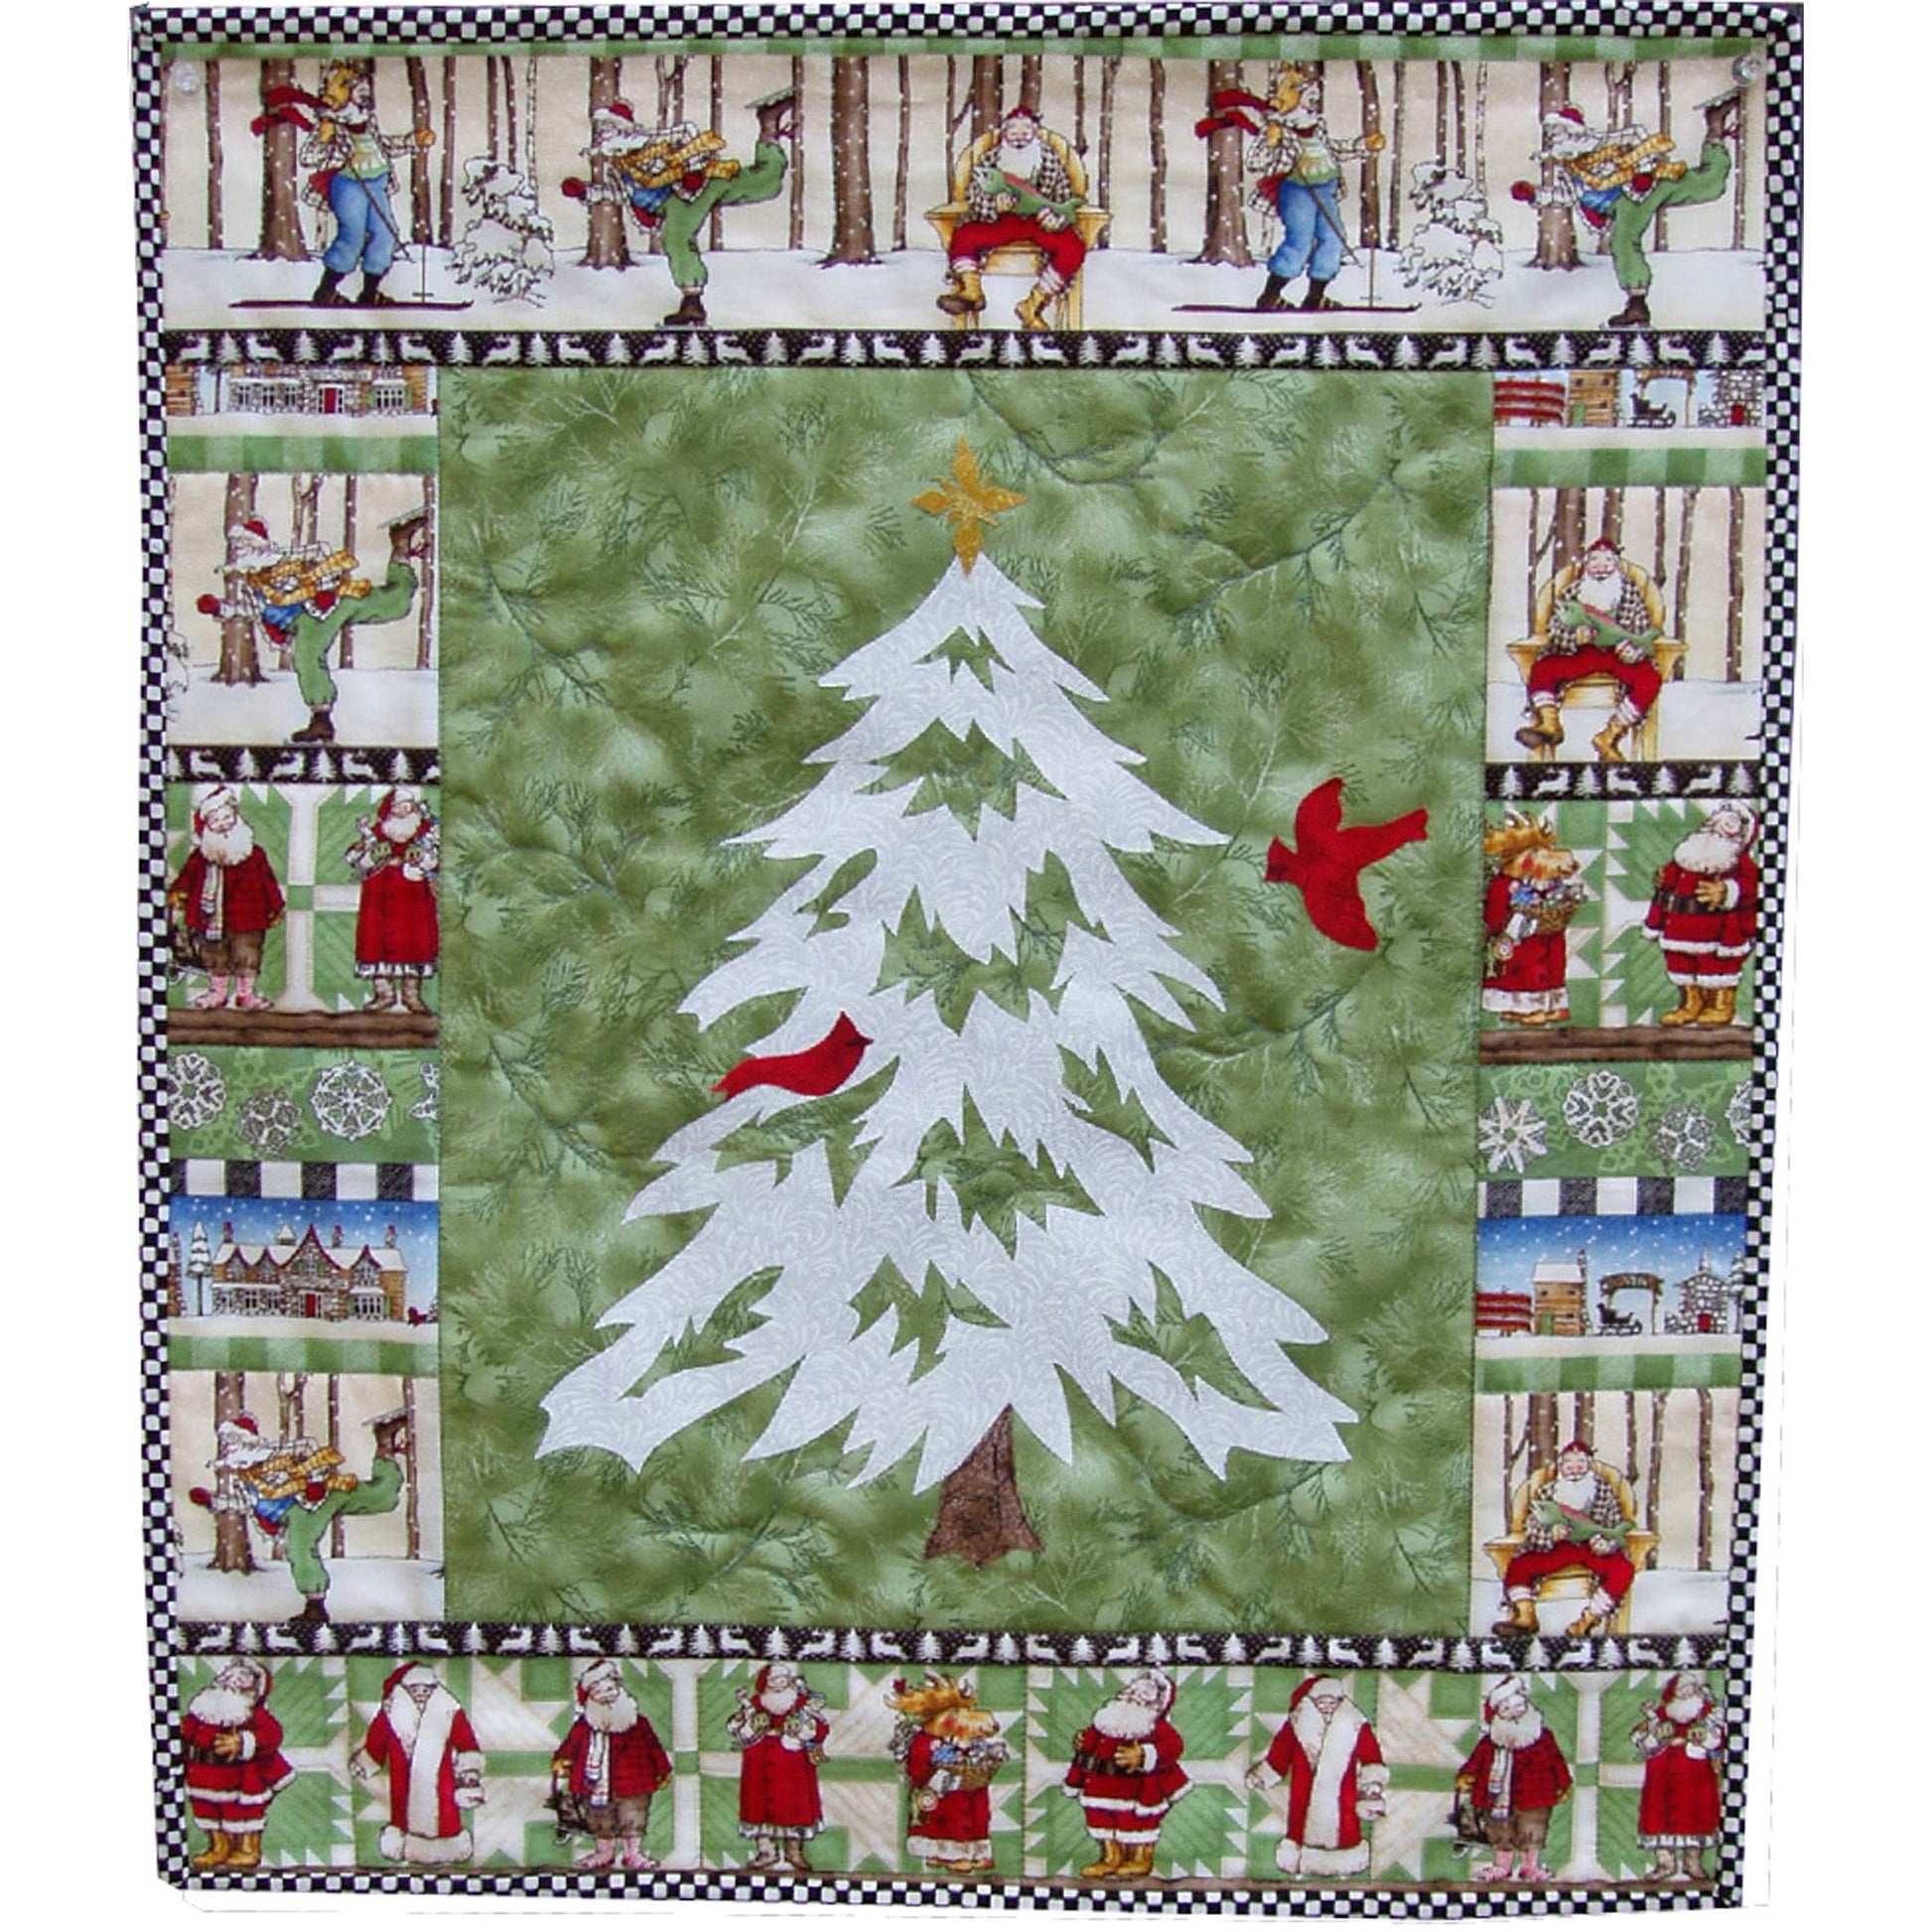 Quilt of a white evergreen tree/outline on a slightly decorative green background and a red bird on one limb and one in the air. Bordered by fun Santa prints.